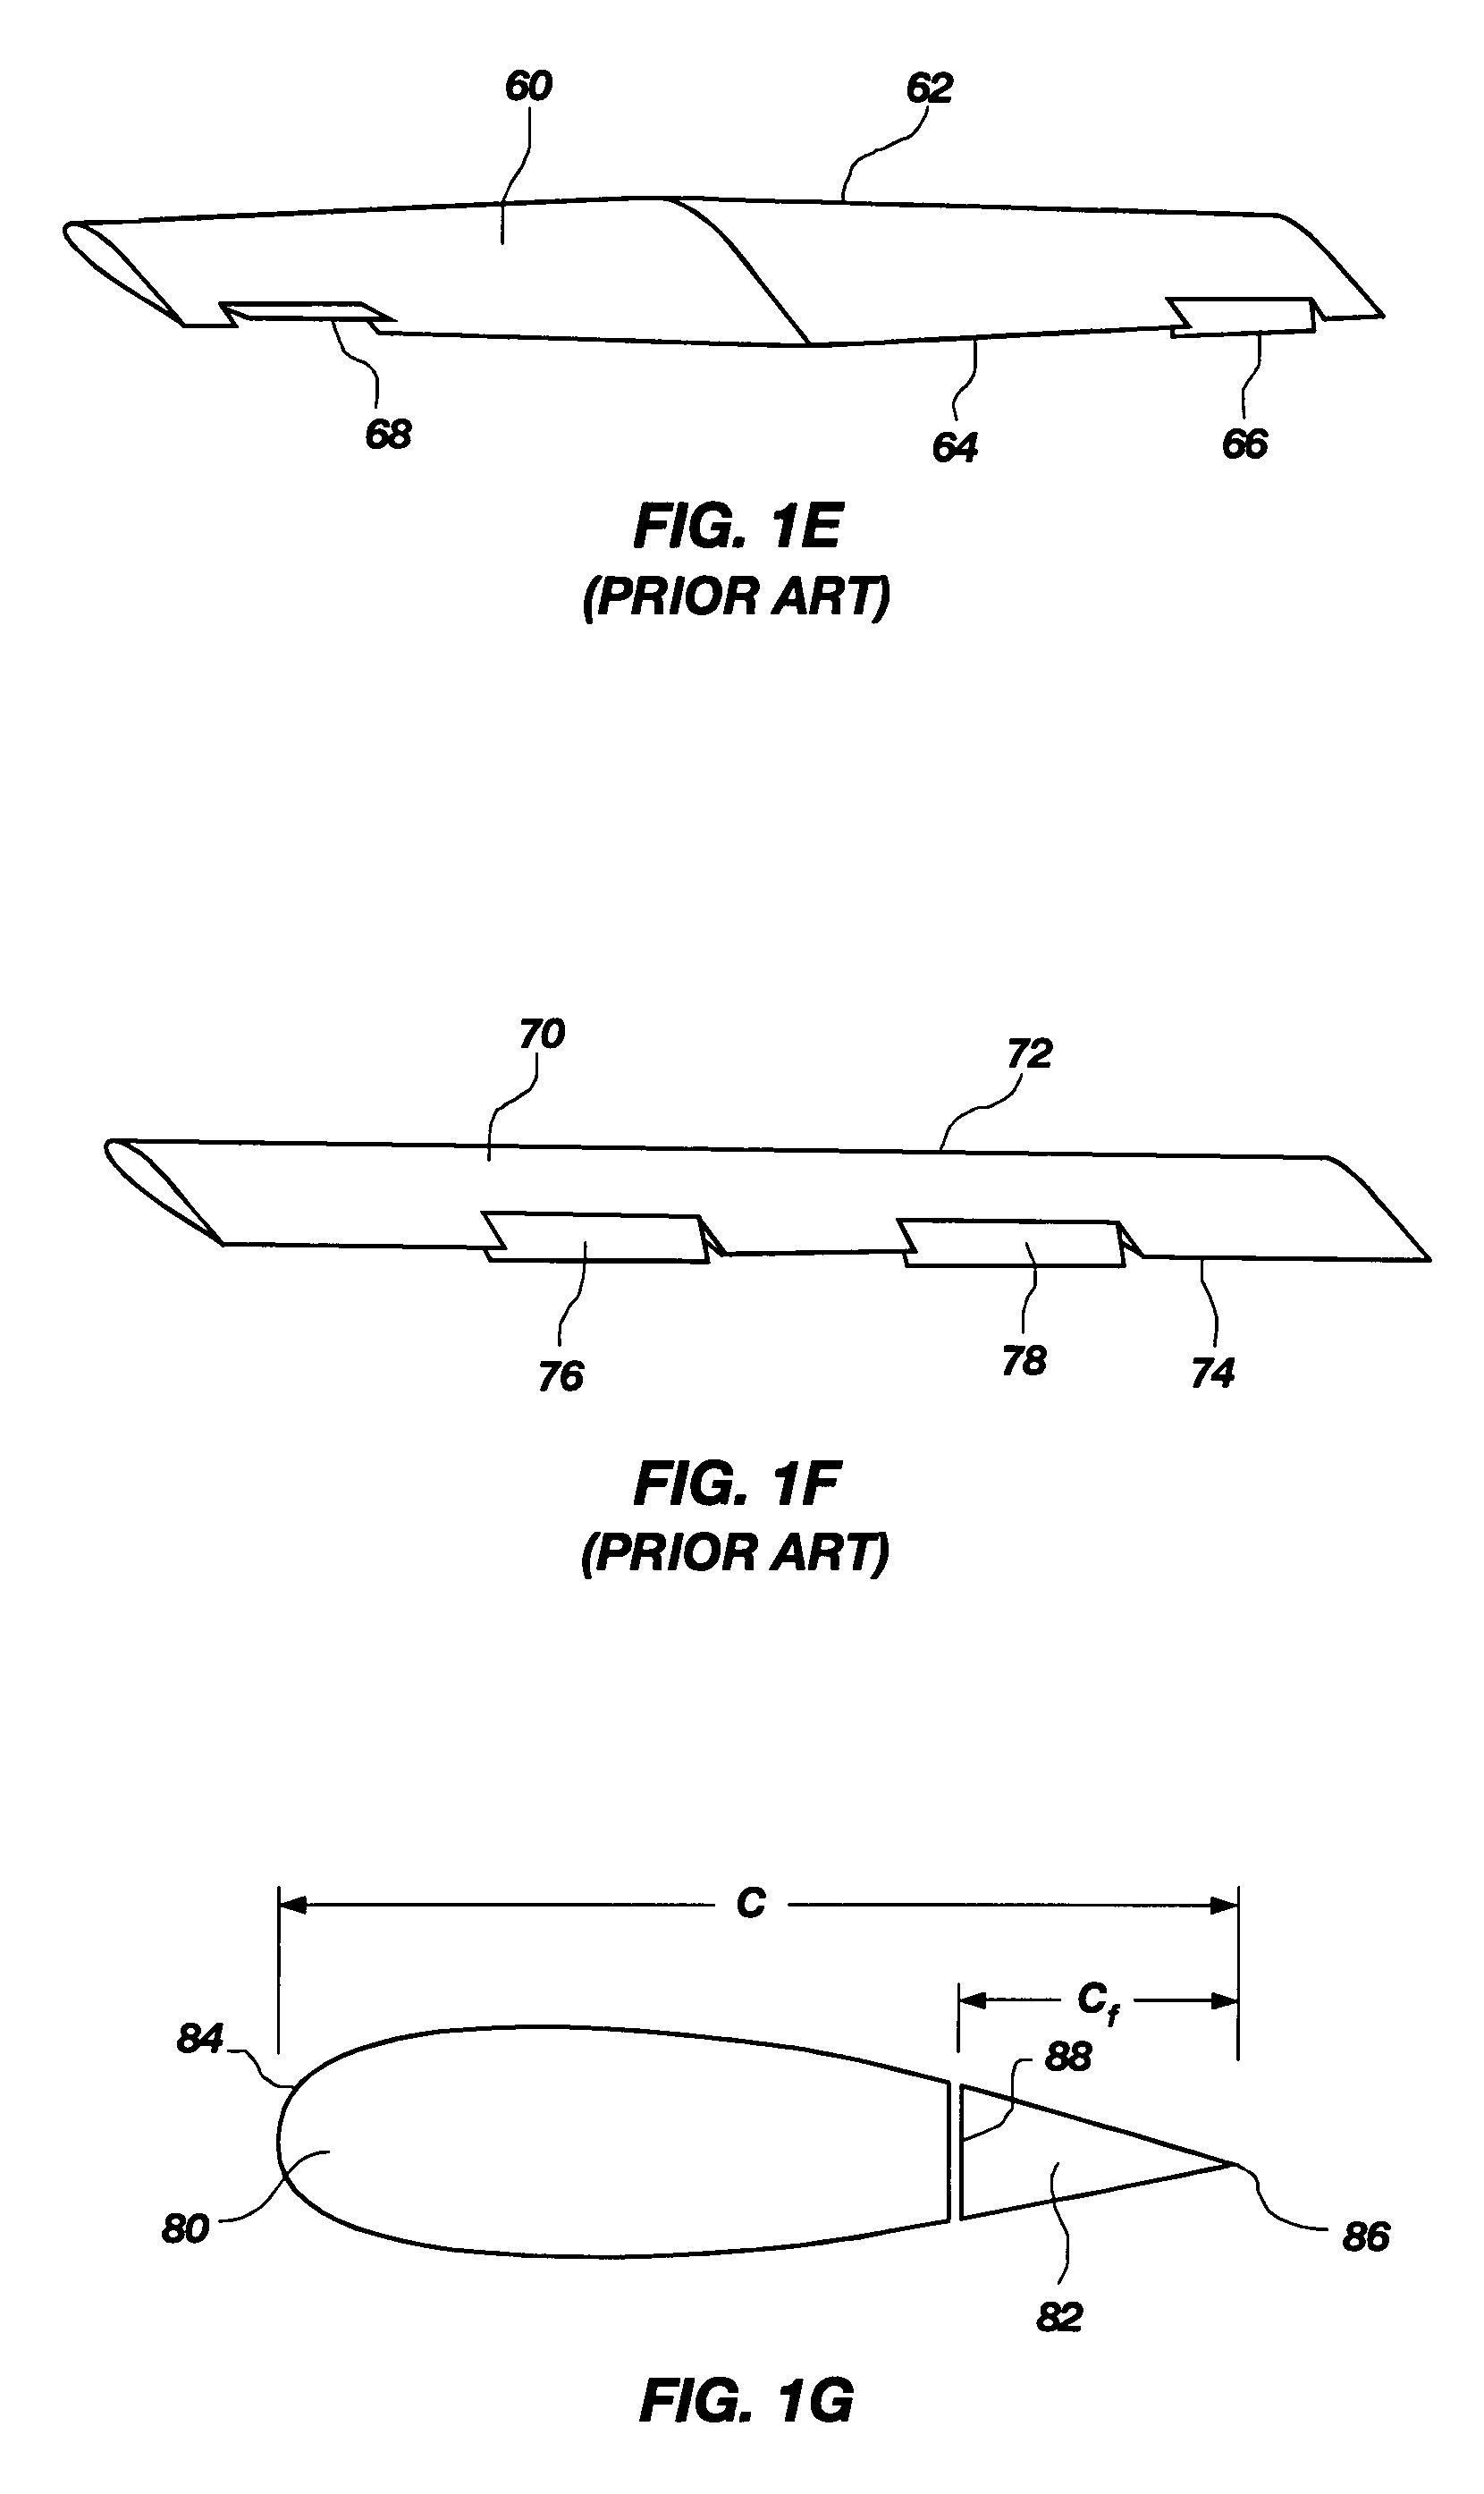 Apparatus and method for twisting a wing to increase lift on aircraft and other vehicles